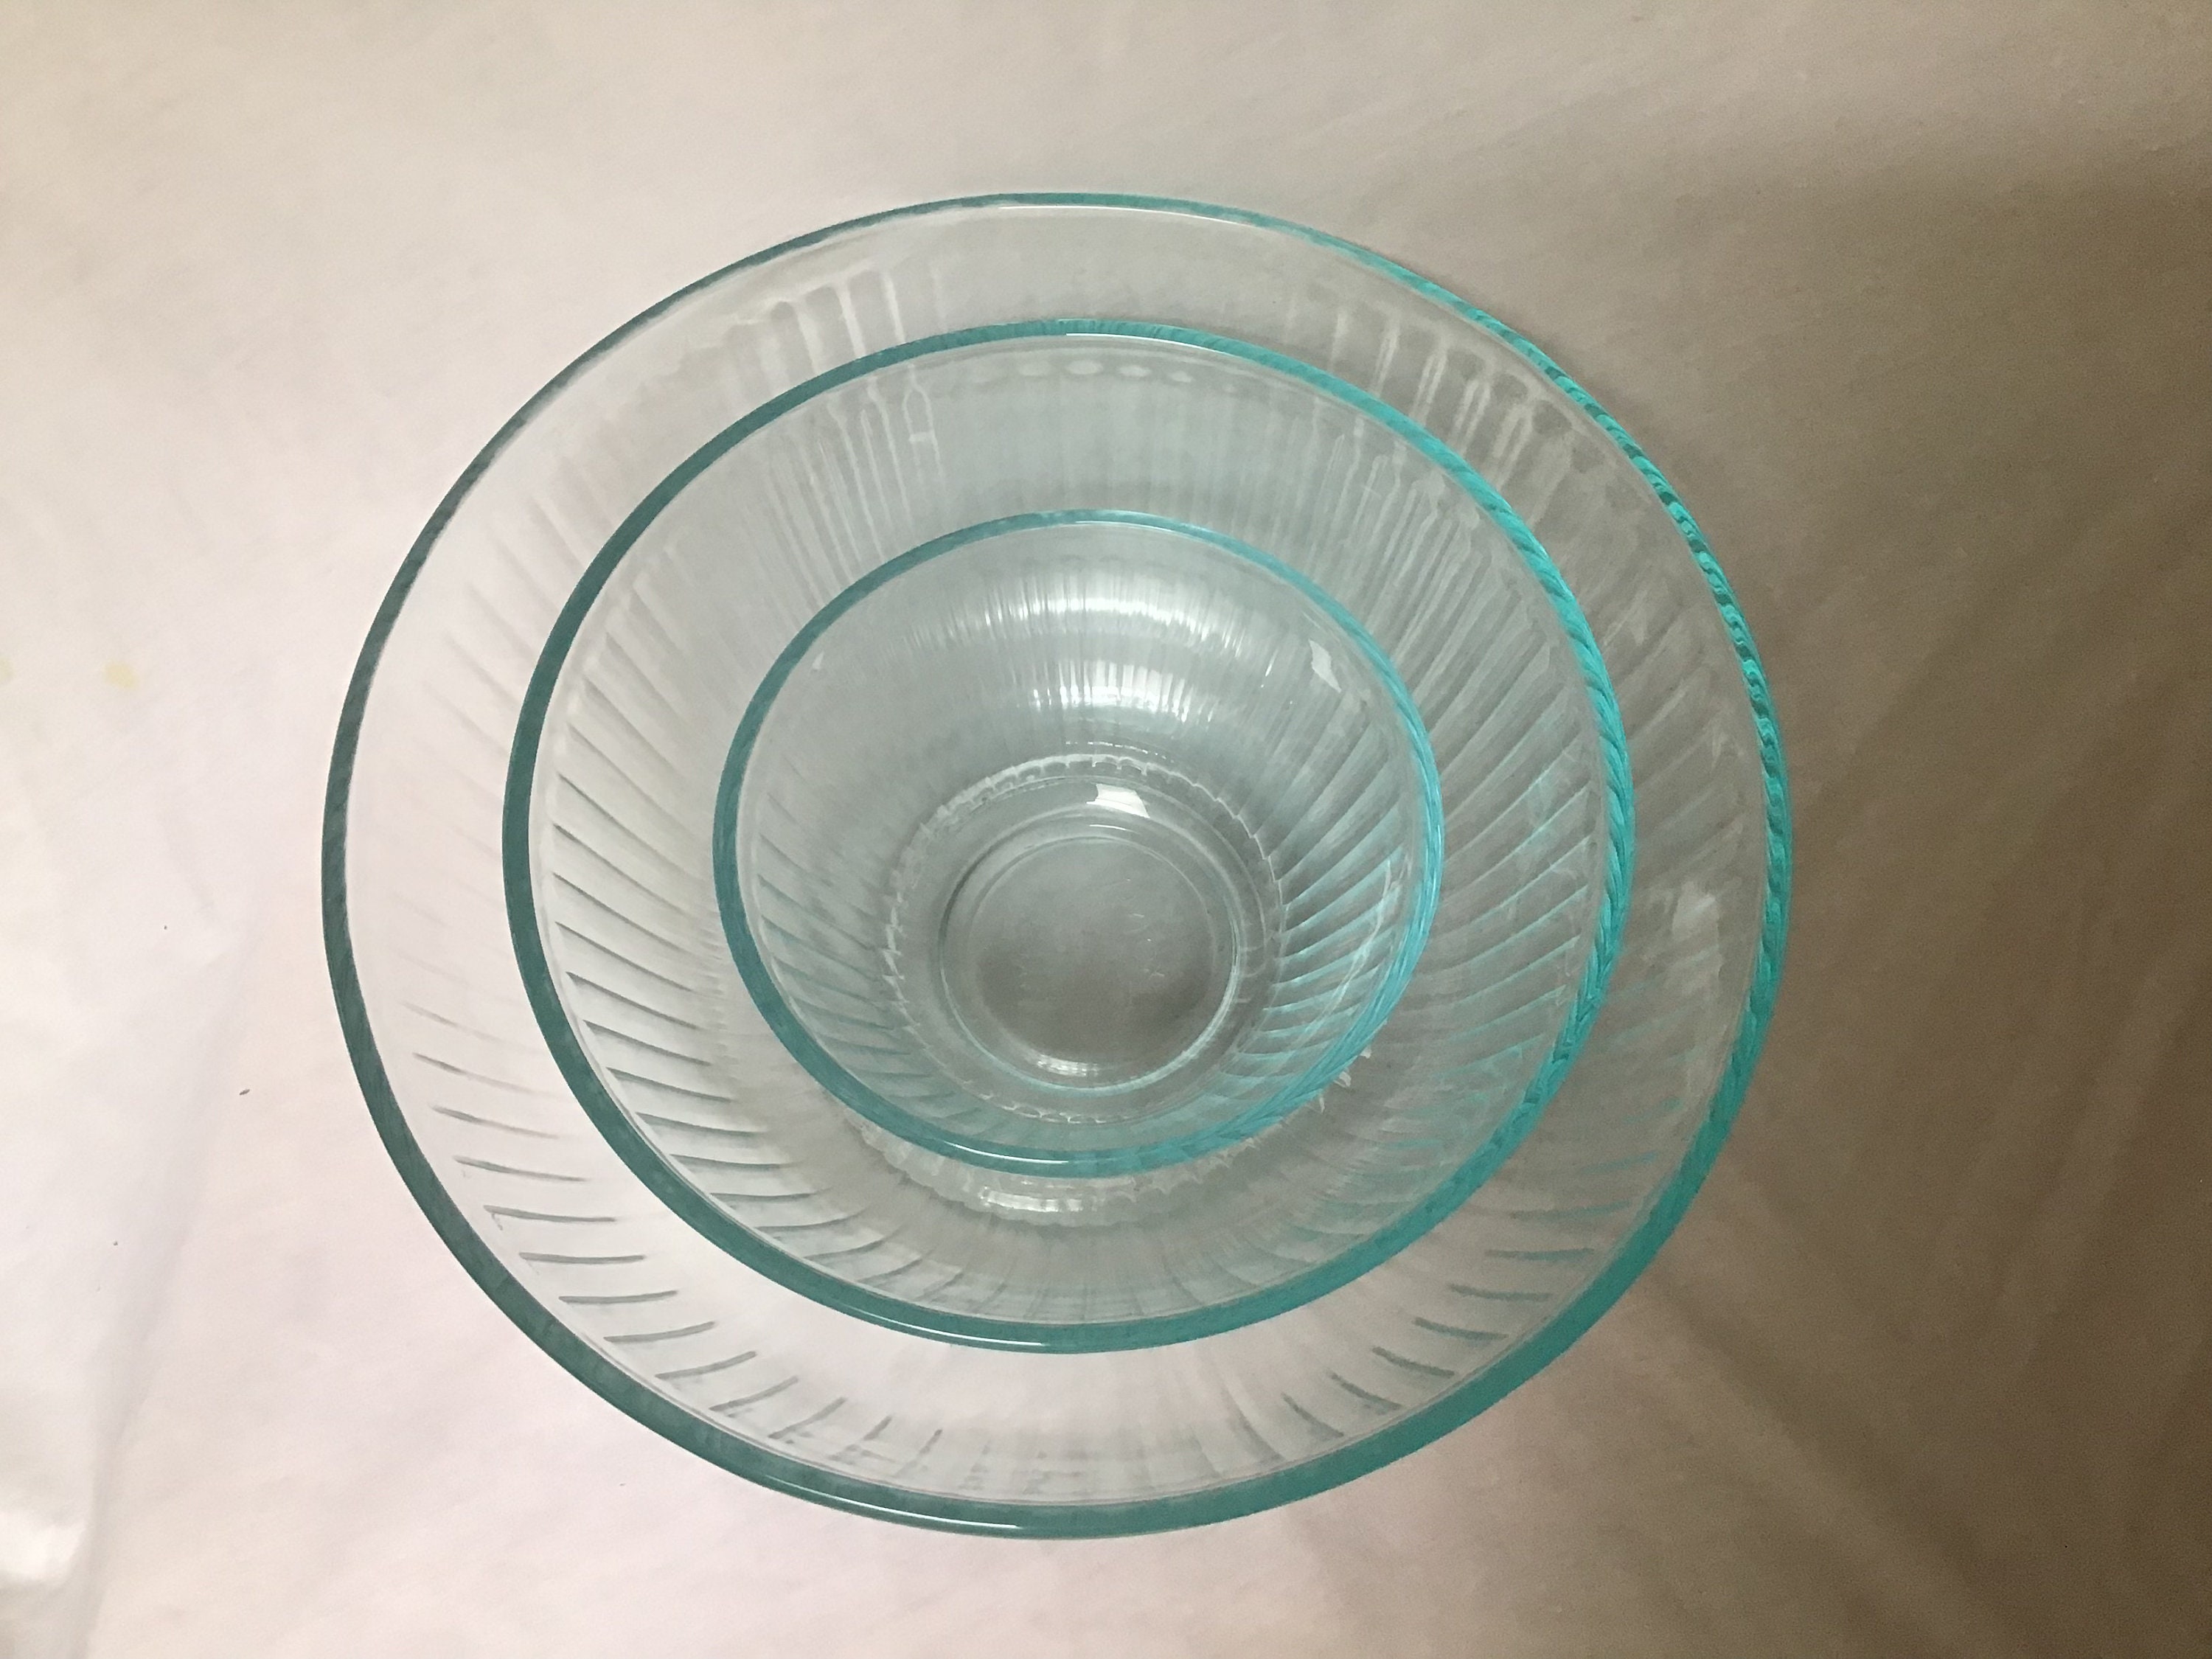 VTG Pyrex Clear Glass Ribbed Mixing Bowl 3 Cup #7401-S Farmhouse